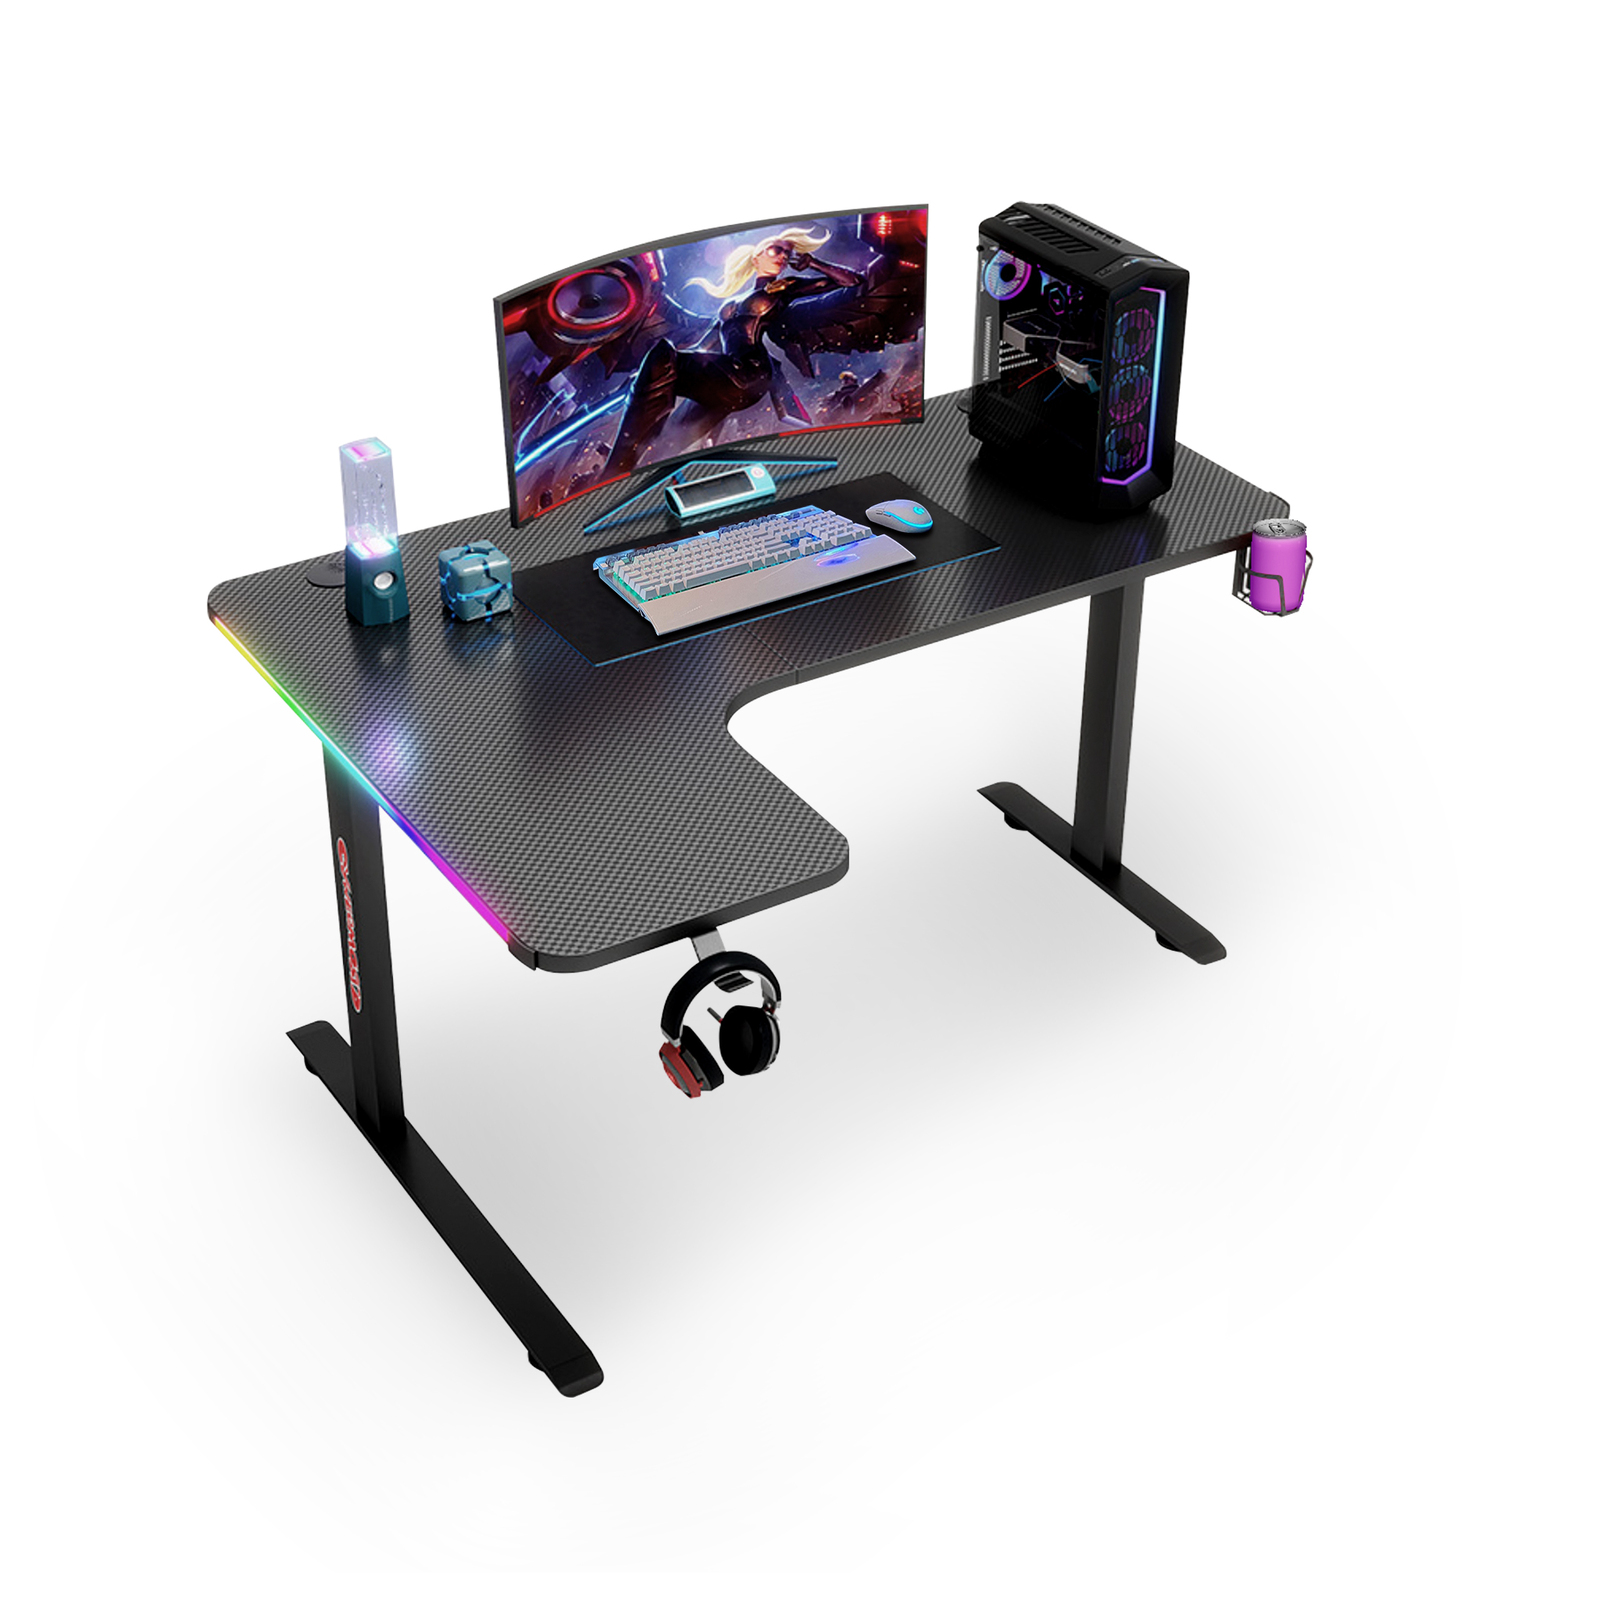 160cm Black RGB LED Gaming Desk Computer Home Office Writing Desk Racer Table Carbon Fiber Table With Cup Holder and Headphone Hook